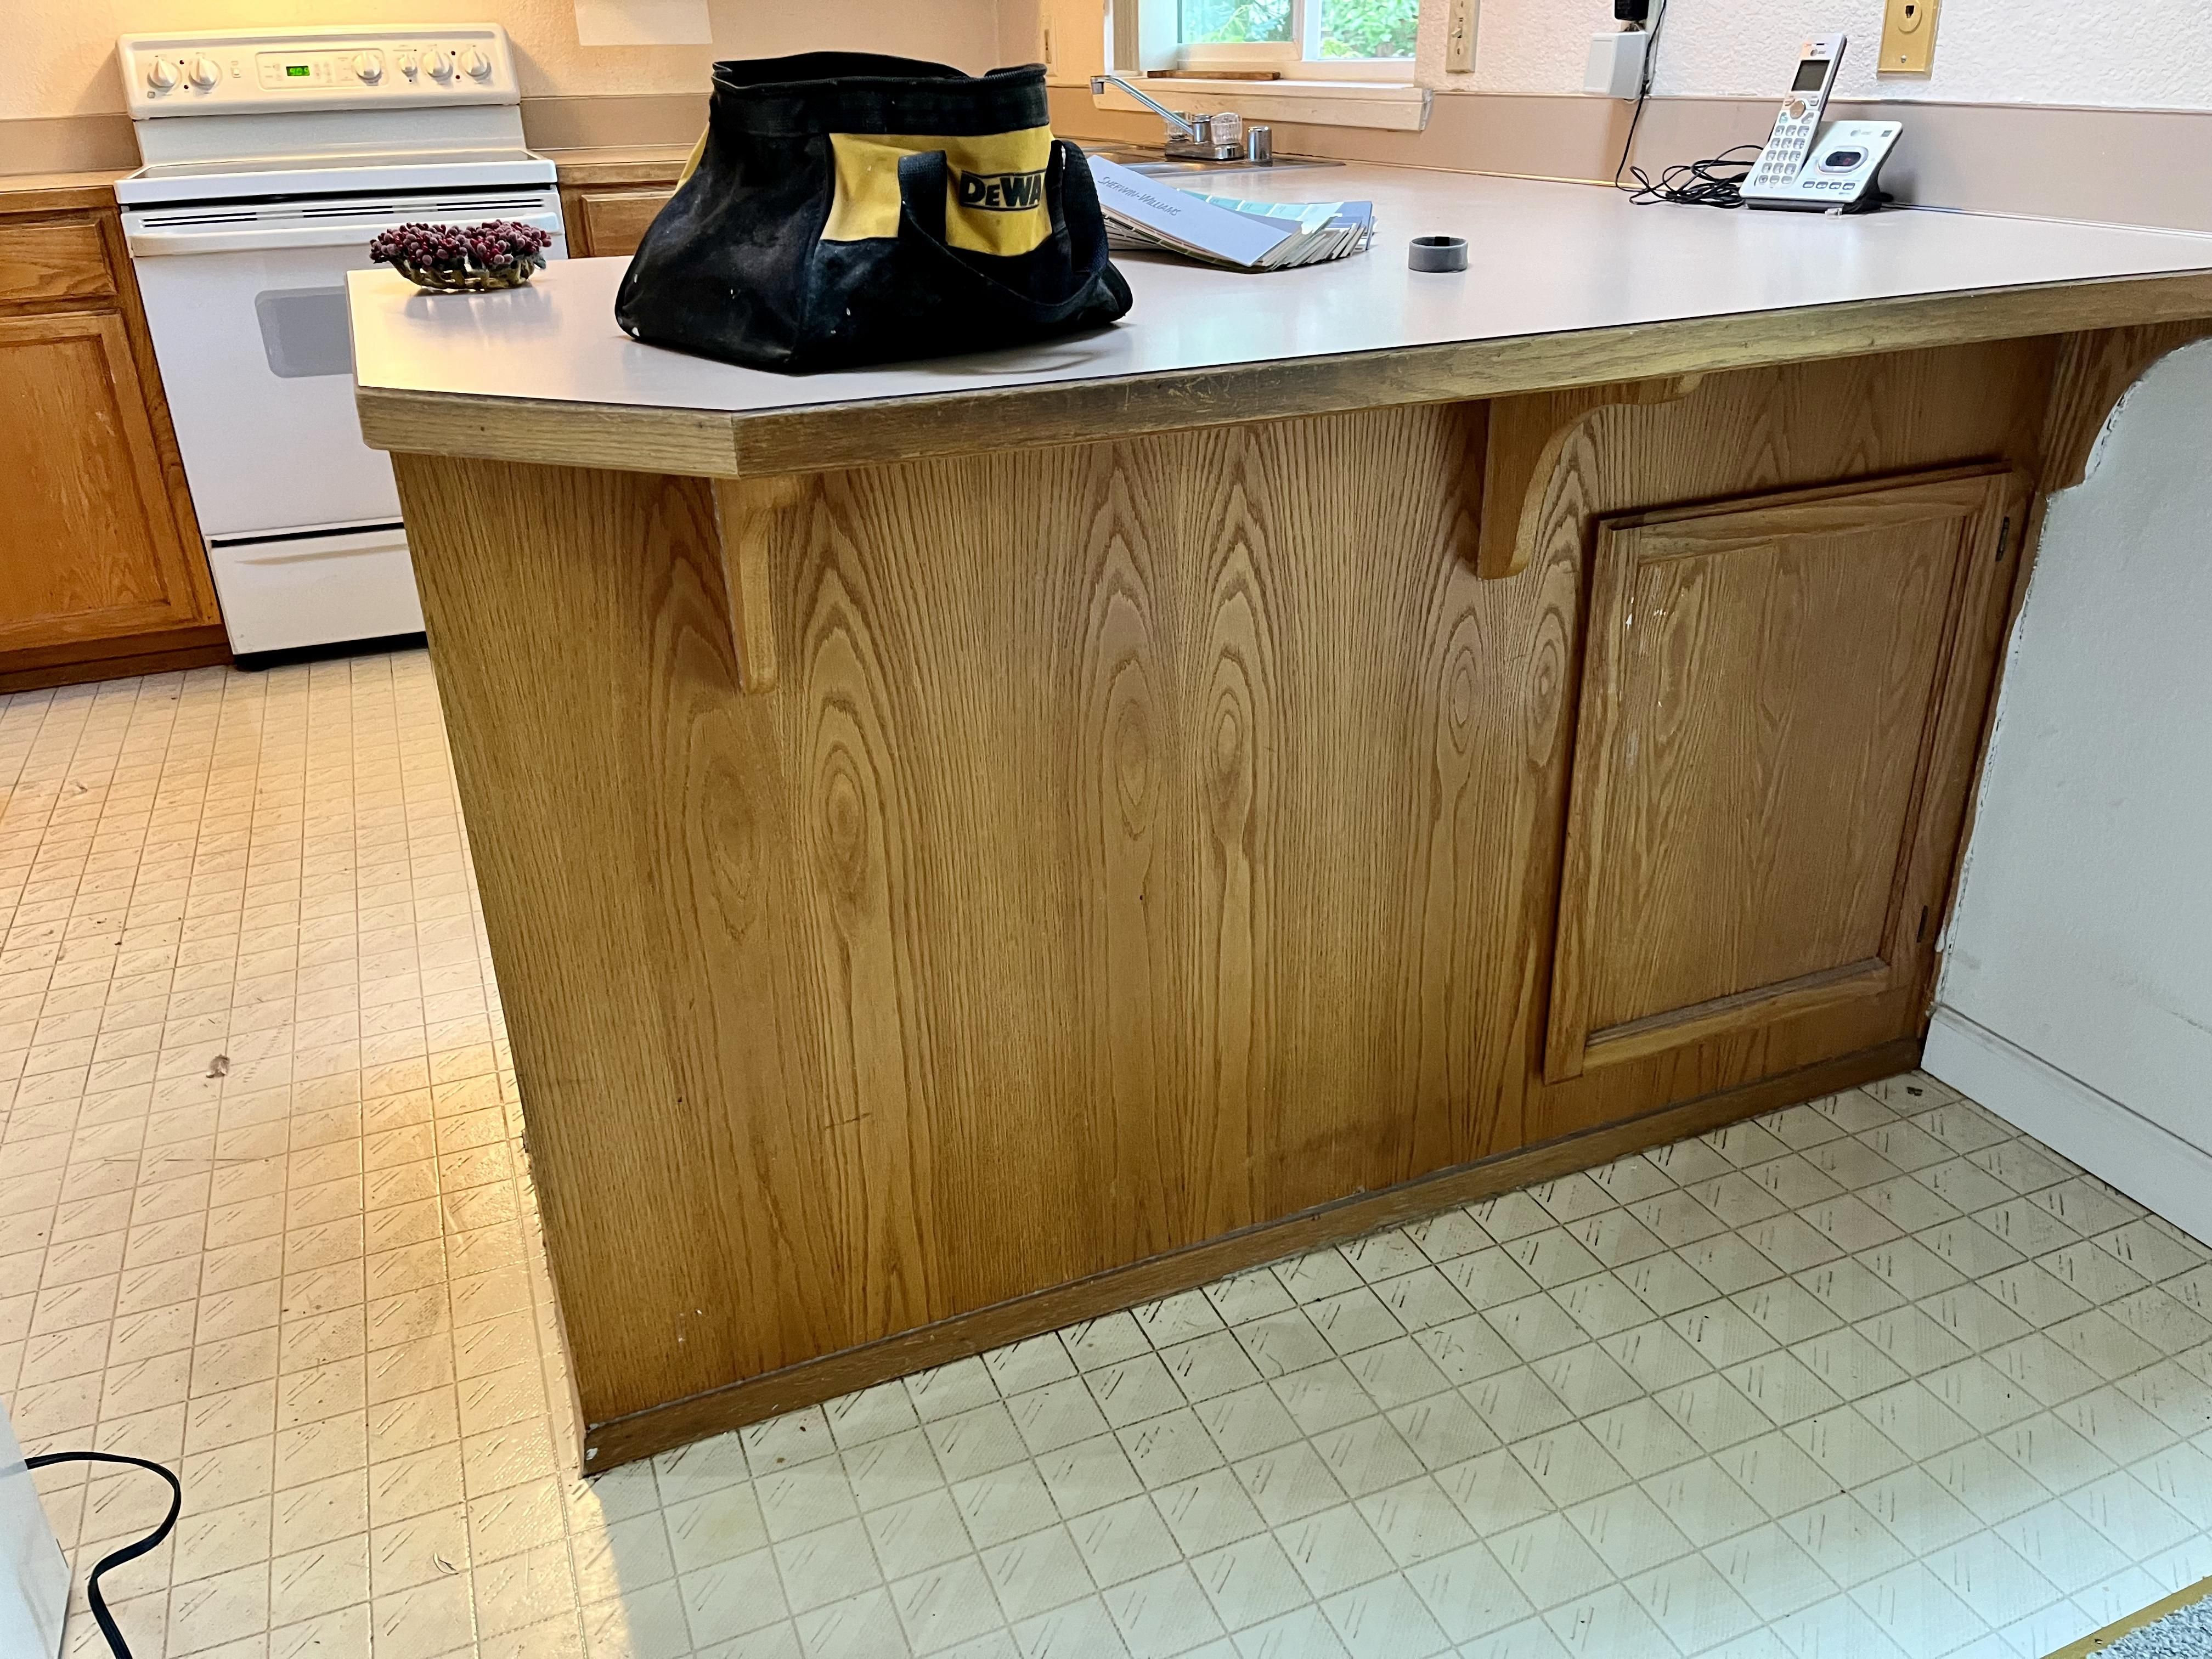 Kitchen and Cabinet Refinishing for Golden Line Painting, LLC in Seattle, WA